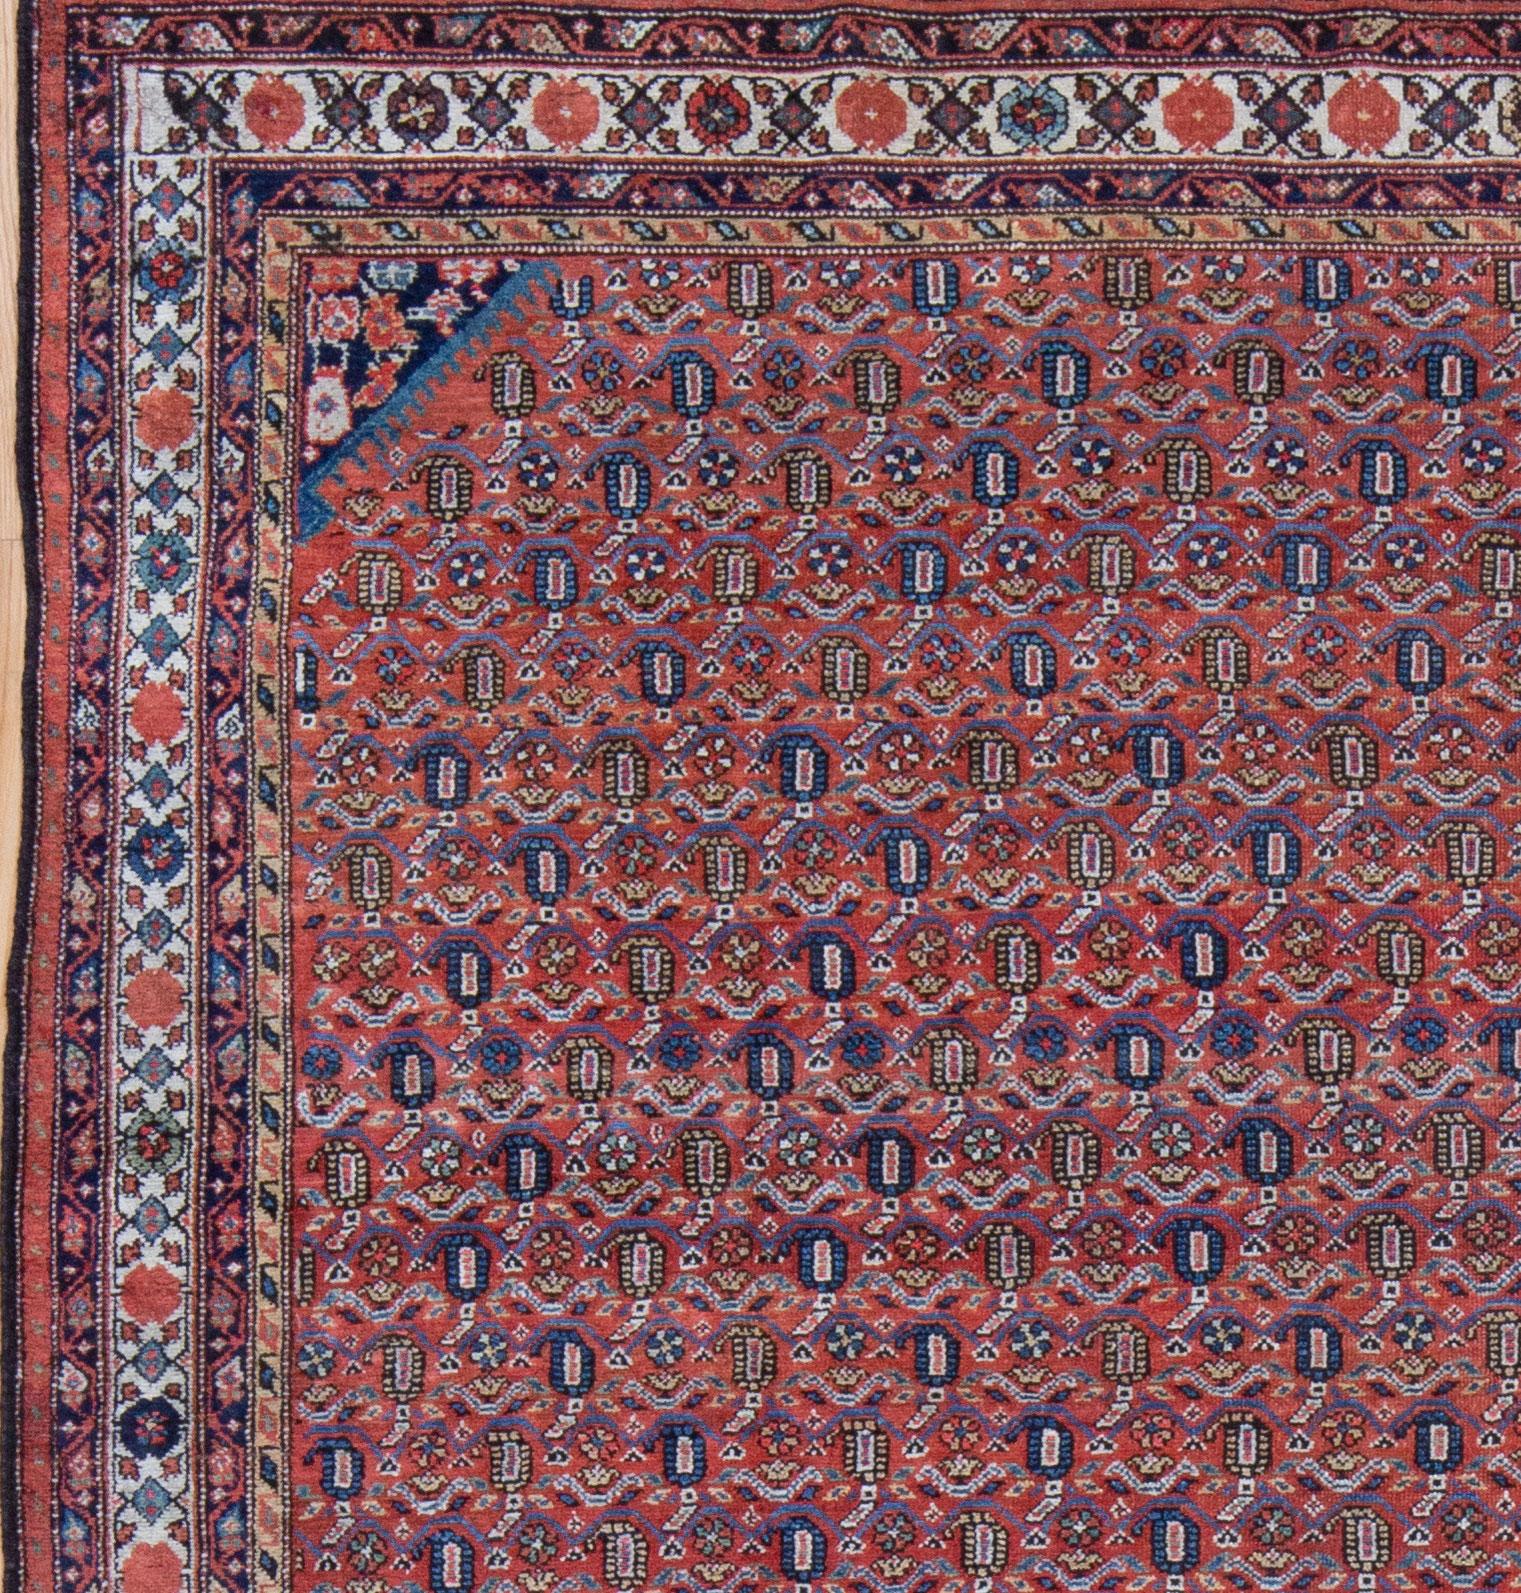 An early 20th century Persian Malayer rug with a boteh (paisley) design. A classic red field with navy and cornflower blue. A durable weave with an even, low wool pile and floppy hand. In good condition with preserves sides and ends. Naturally dyed. 